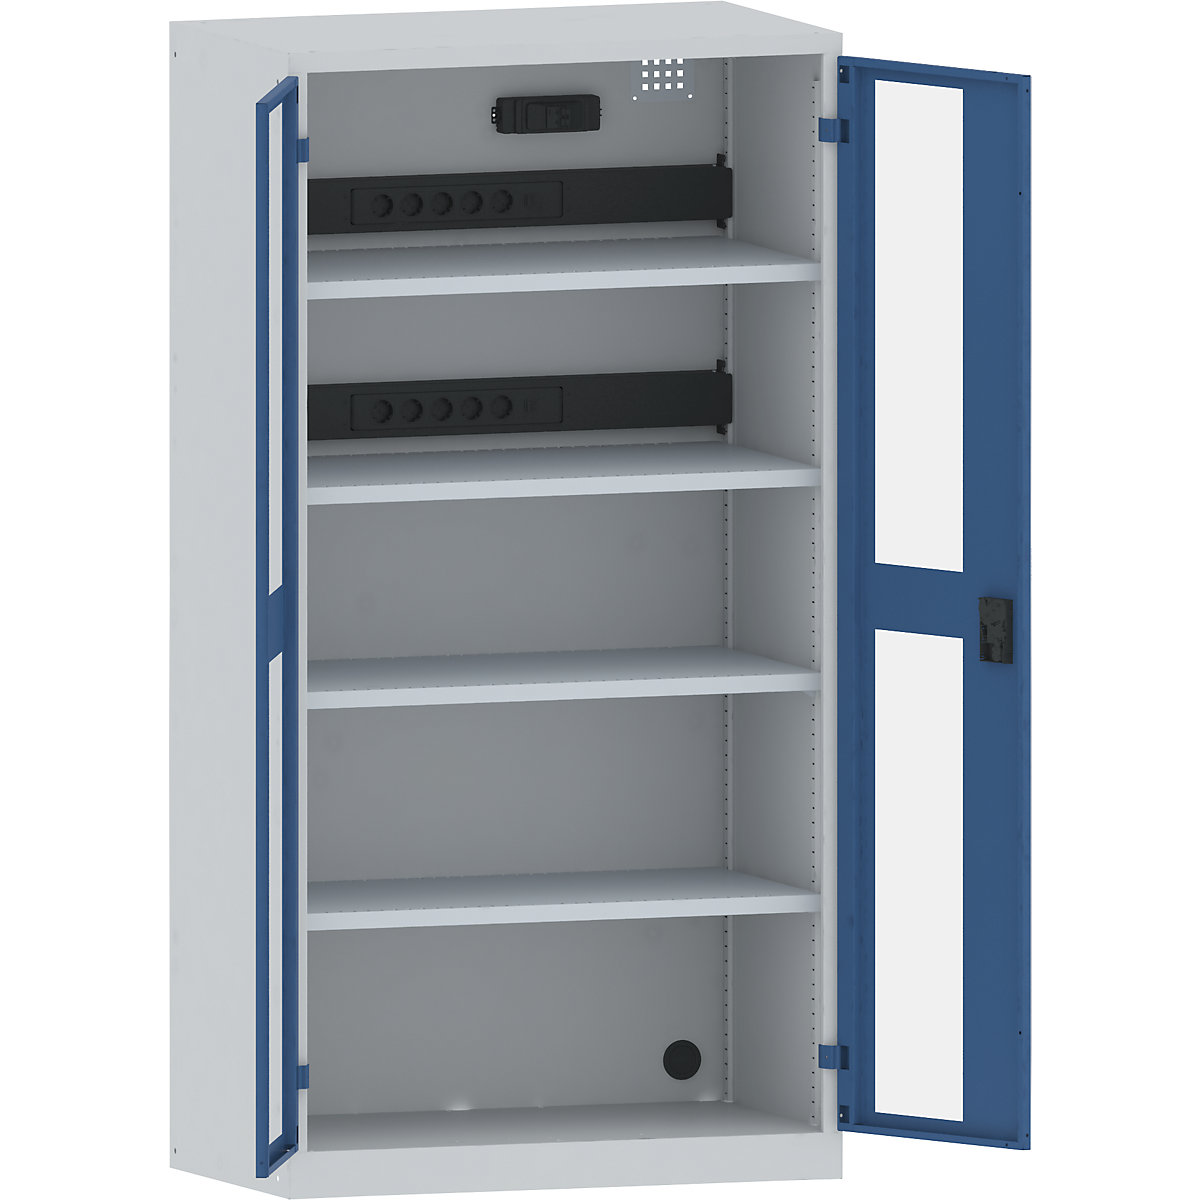 Battery charging cabinet – LISTA, 4 shelves, vision panel doors, 2 power strips at rear with RCD/circuit breaker, grey / blue-8